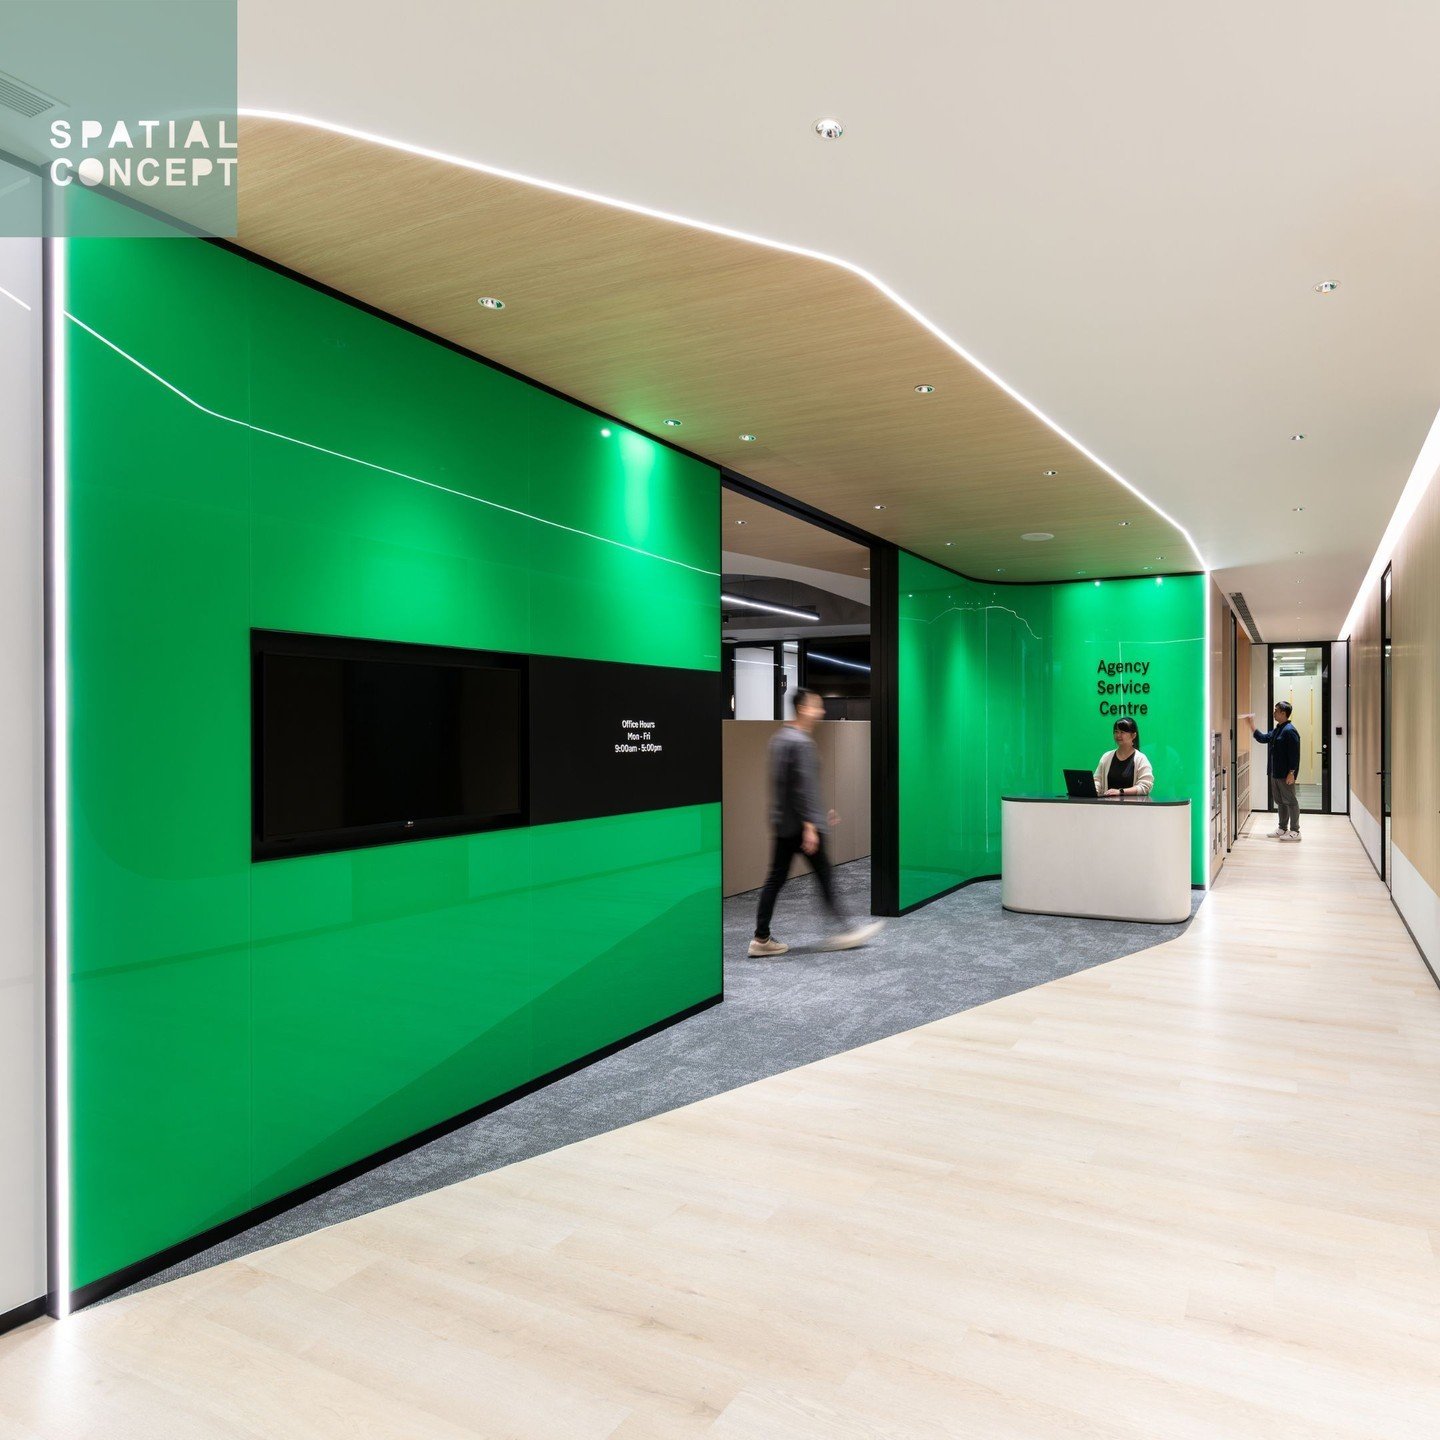 The Manulife Agency Service Centre, designed by Spatial Concept, promotes employee well-being and productivity. The futuristic, vibrant green reception area establishes a strong brand connection. Inside the centre, private booths for confidential con